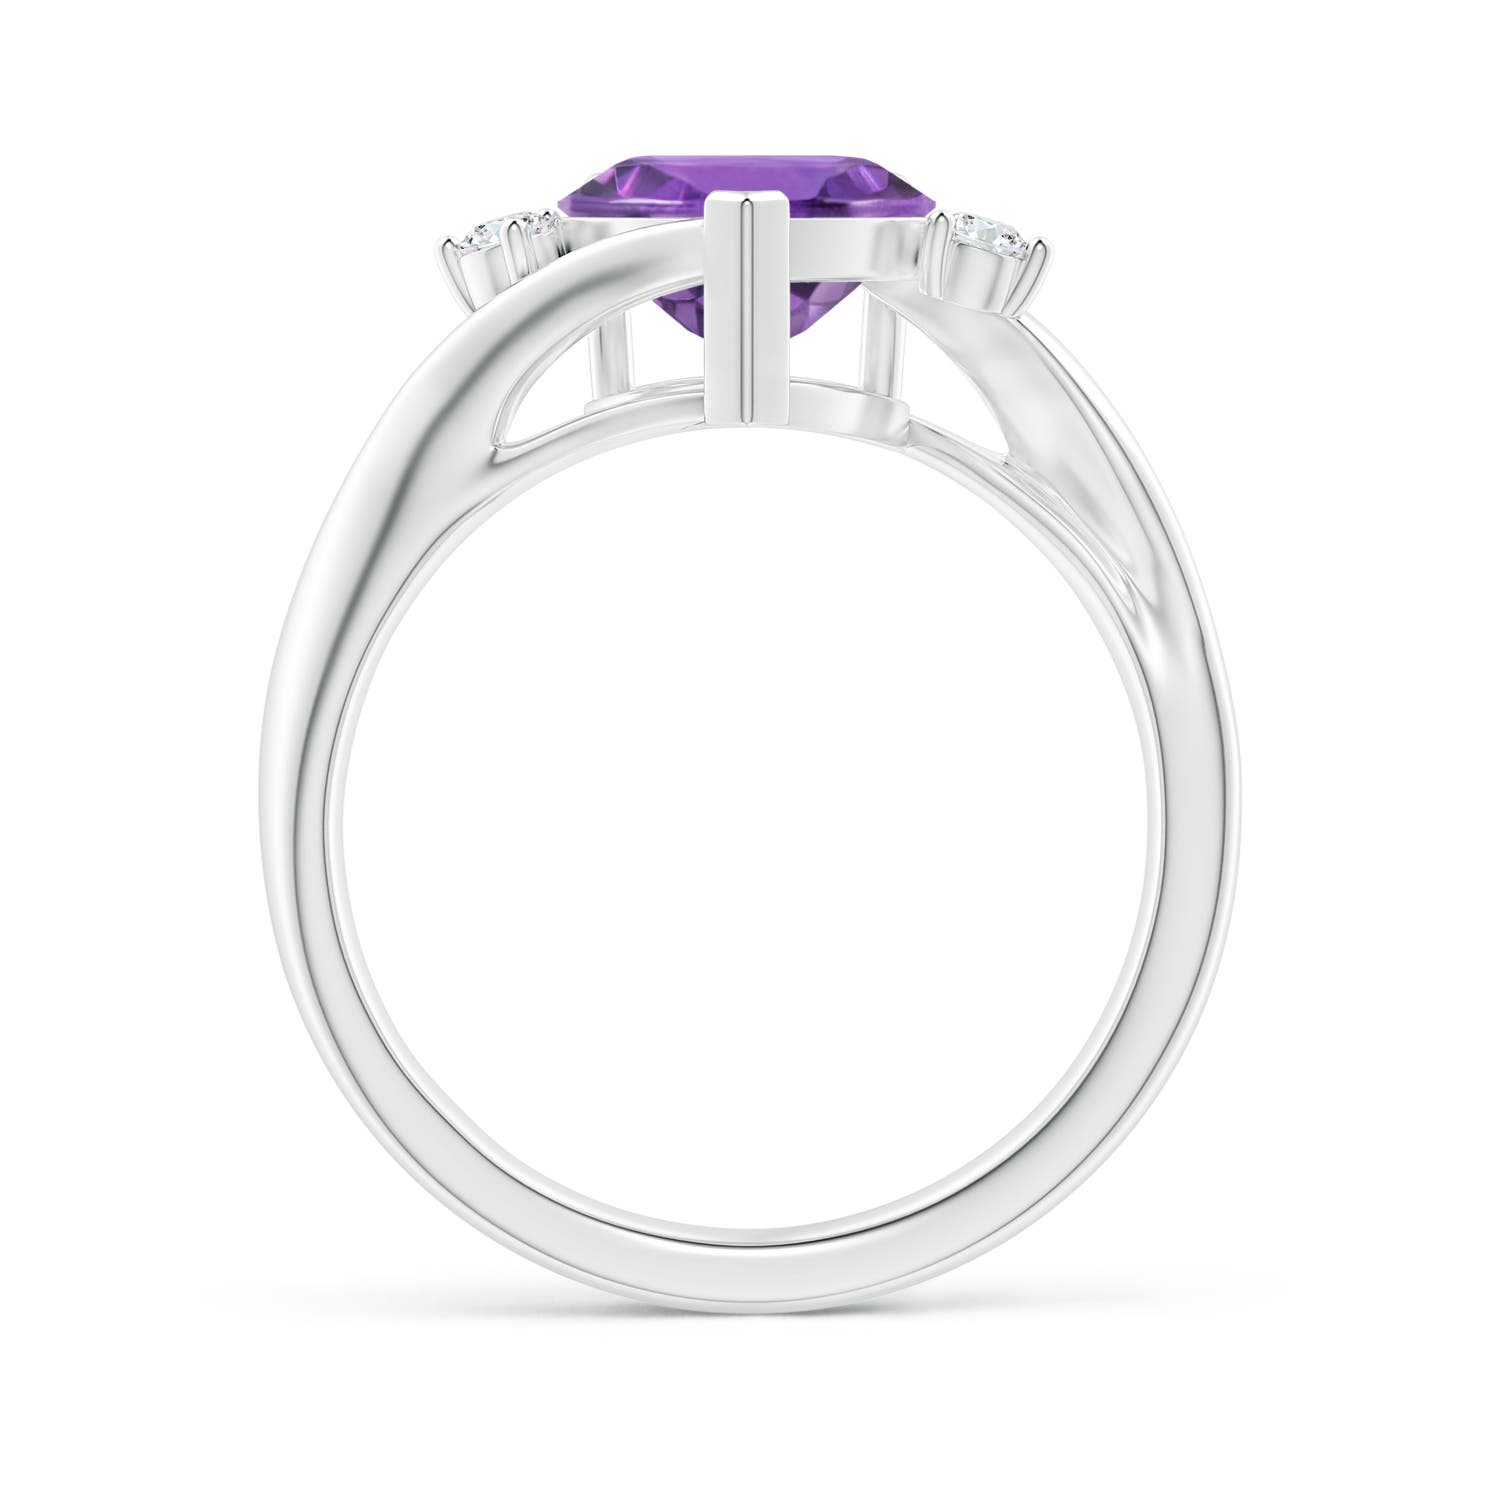 AA - Amethyst / 1.59 CT / 14 KT White Gold